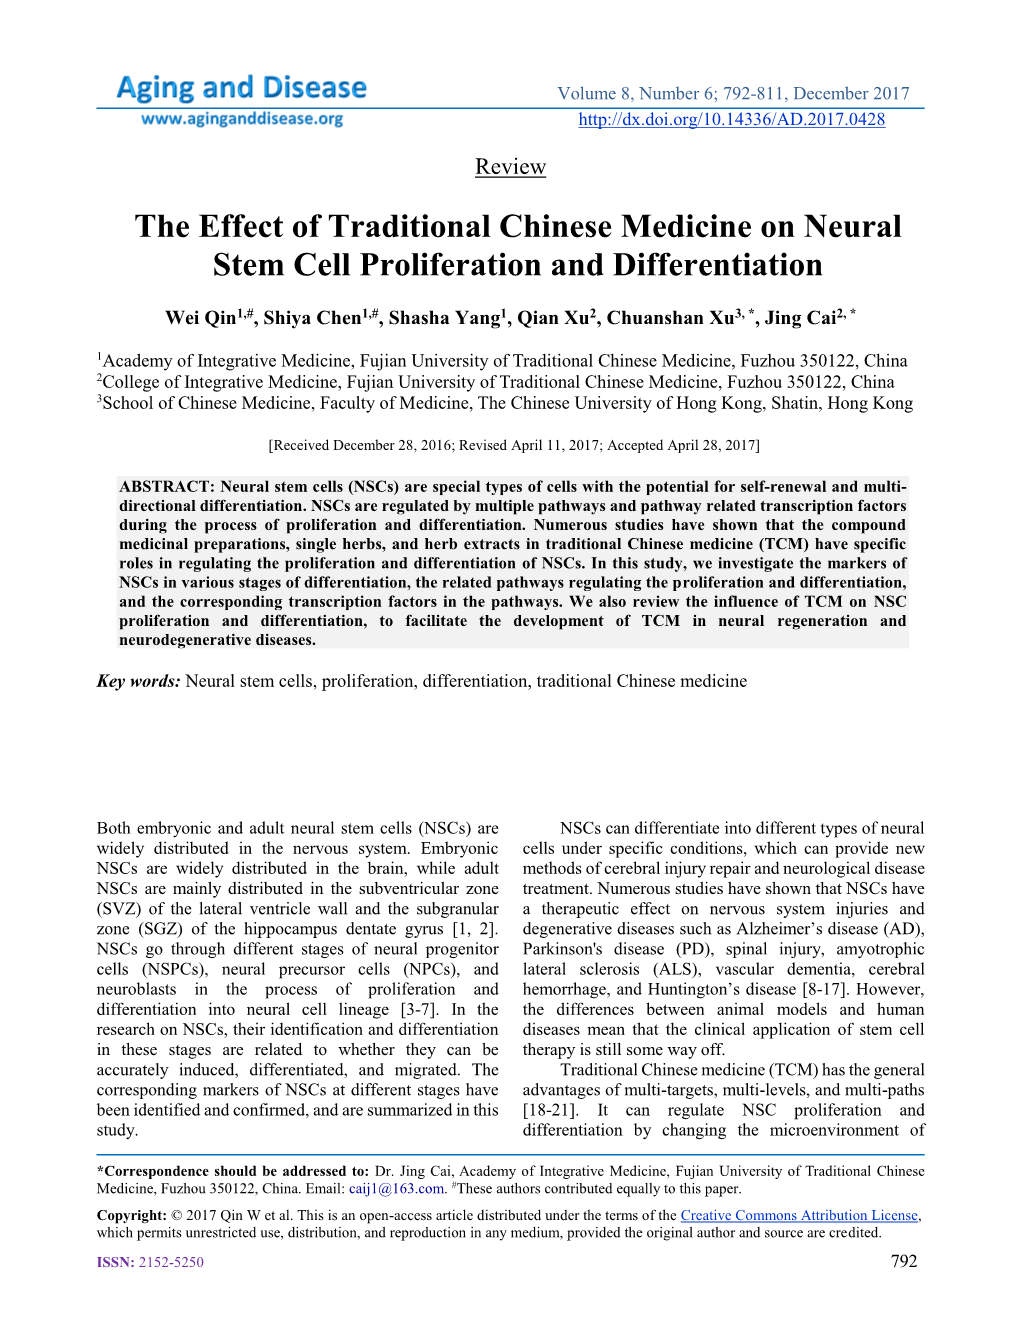 The Effect of Traditional Chinese Medicine on Neural Stem Cell Proliferation and Differentiation